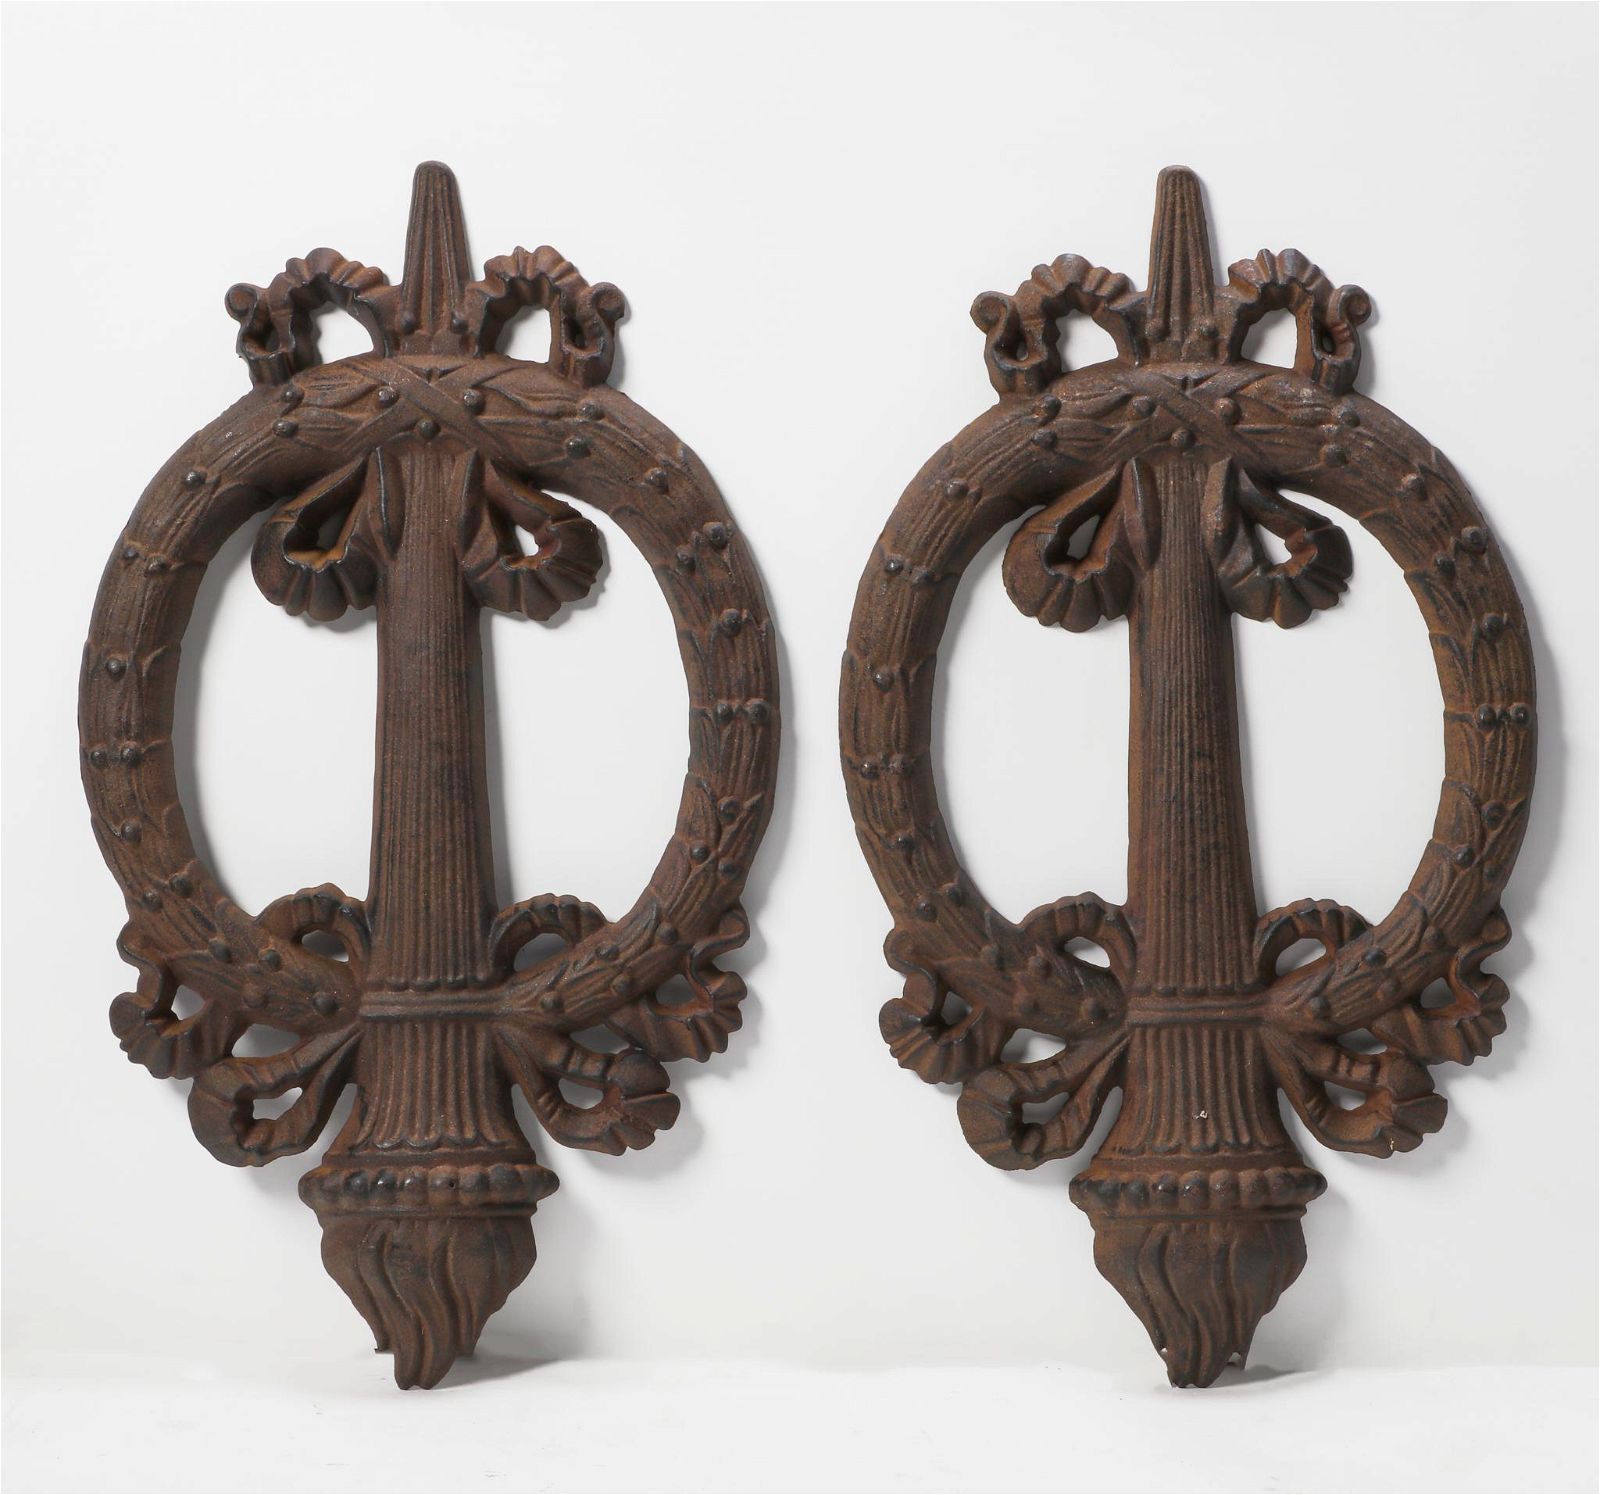 SIX NEOCLASSICAL STYLE IRON LAUREL 2fb2a2a